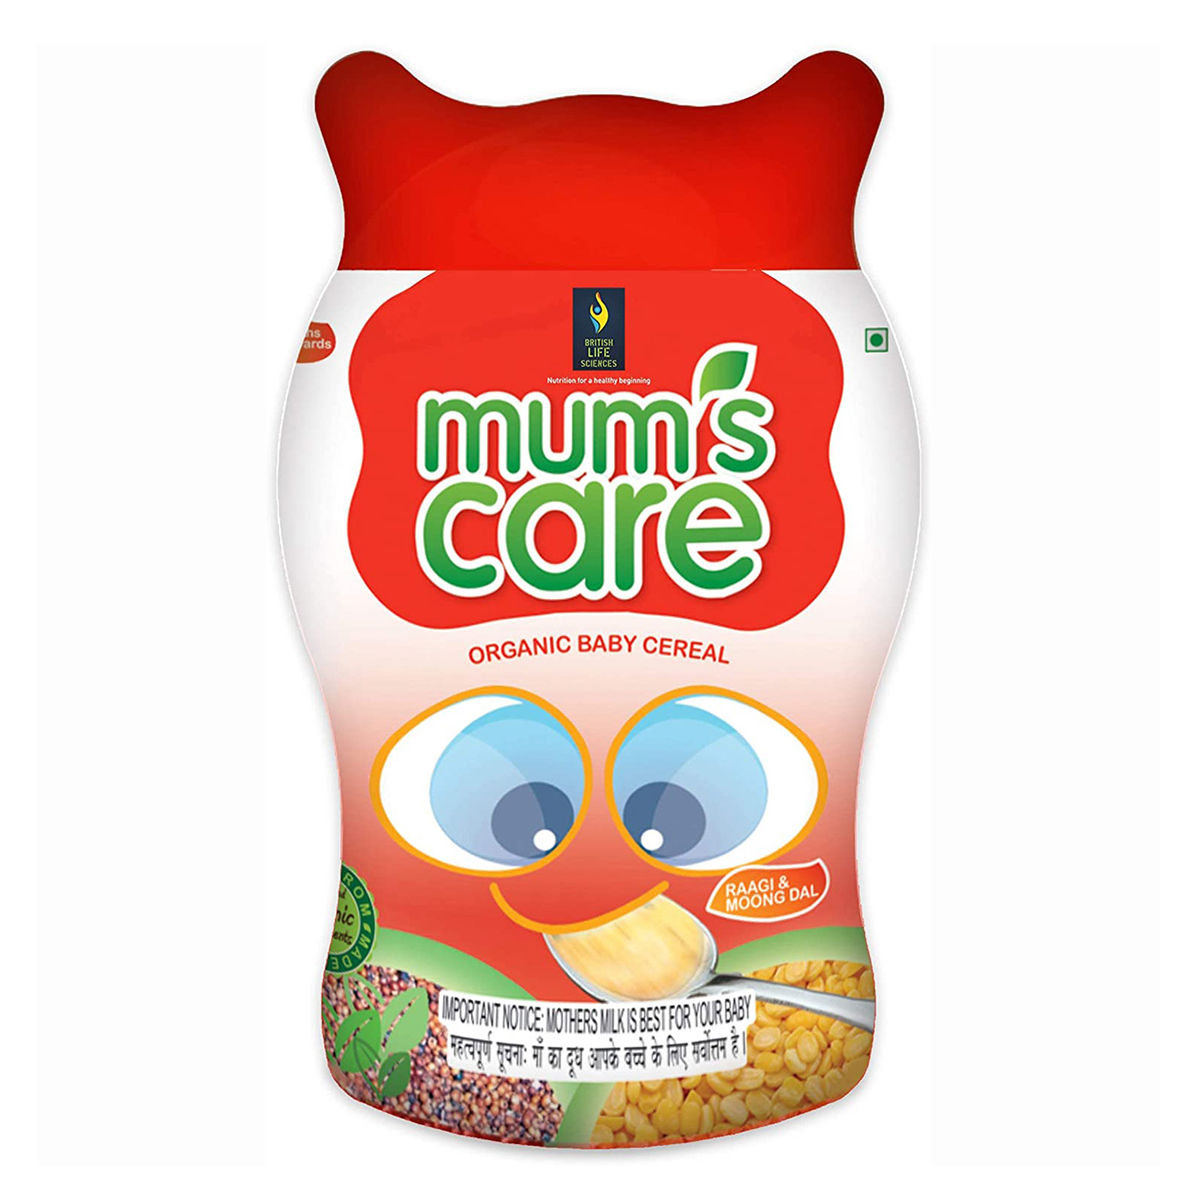 Buy Mum’s Care Organic Baby Cereal with Ragi and Moong Dal, 300 gm Jar Online